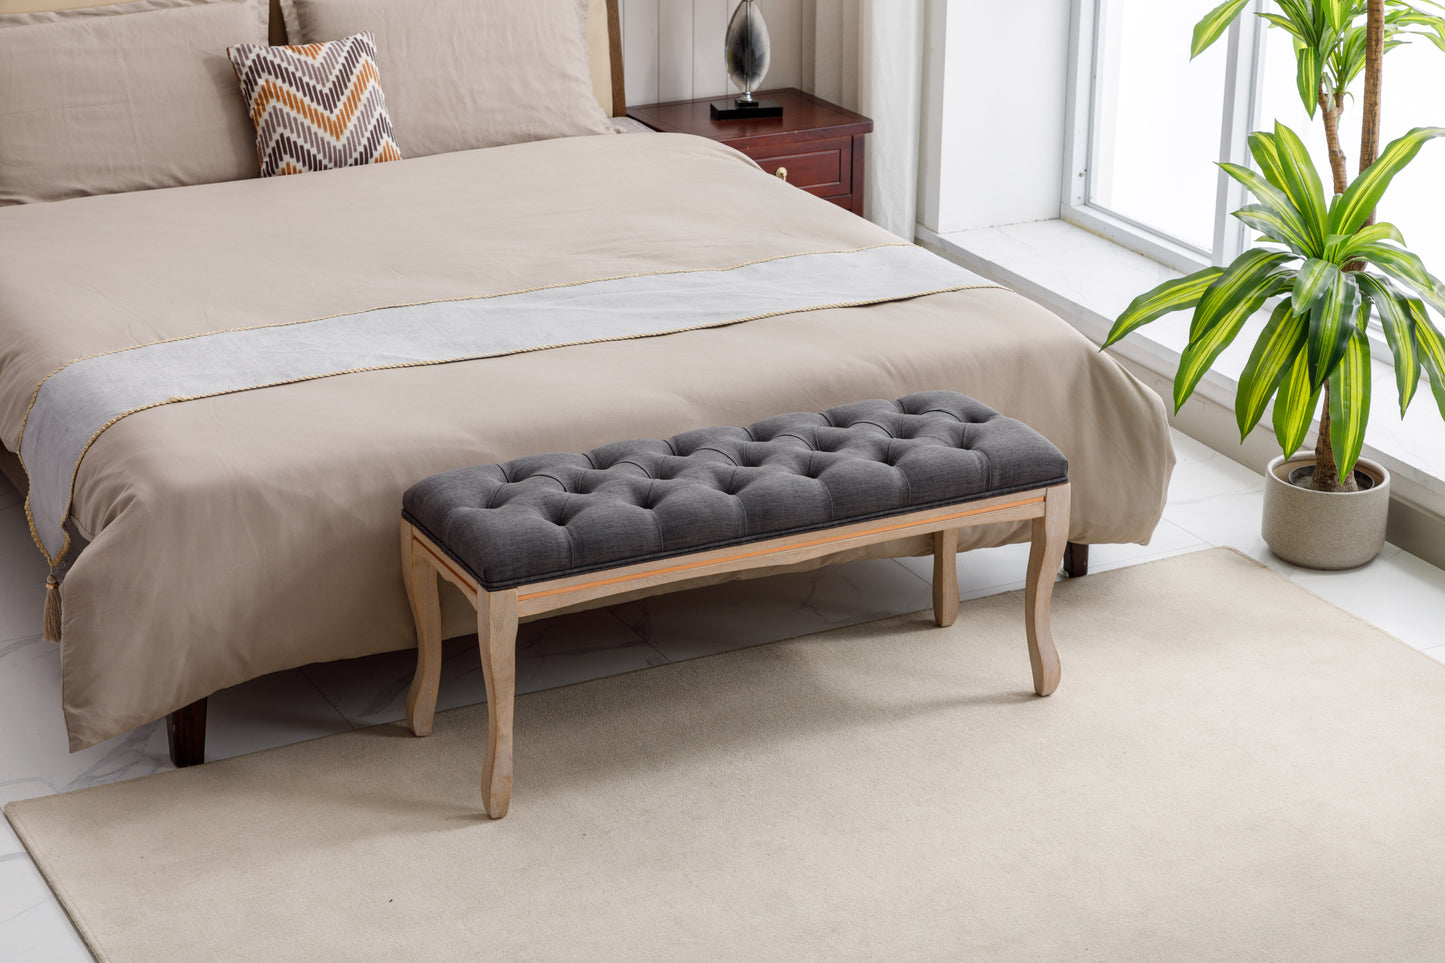 Weston Upholstered Tufted Bench